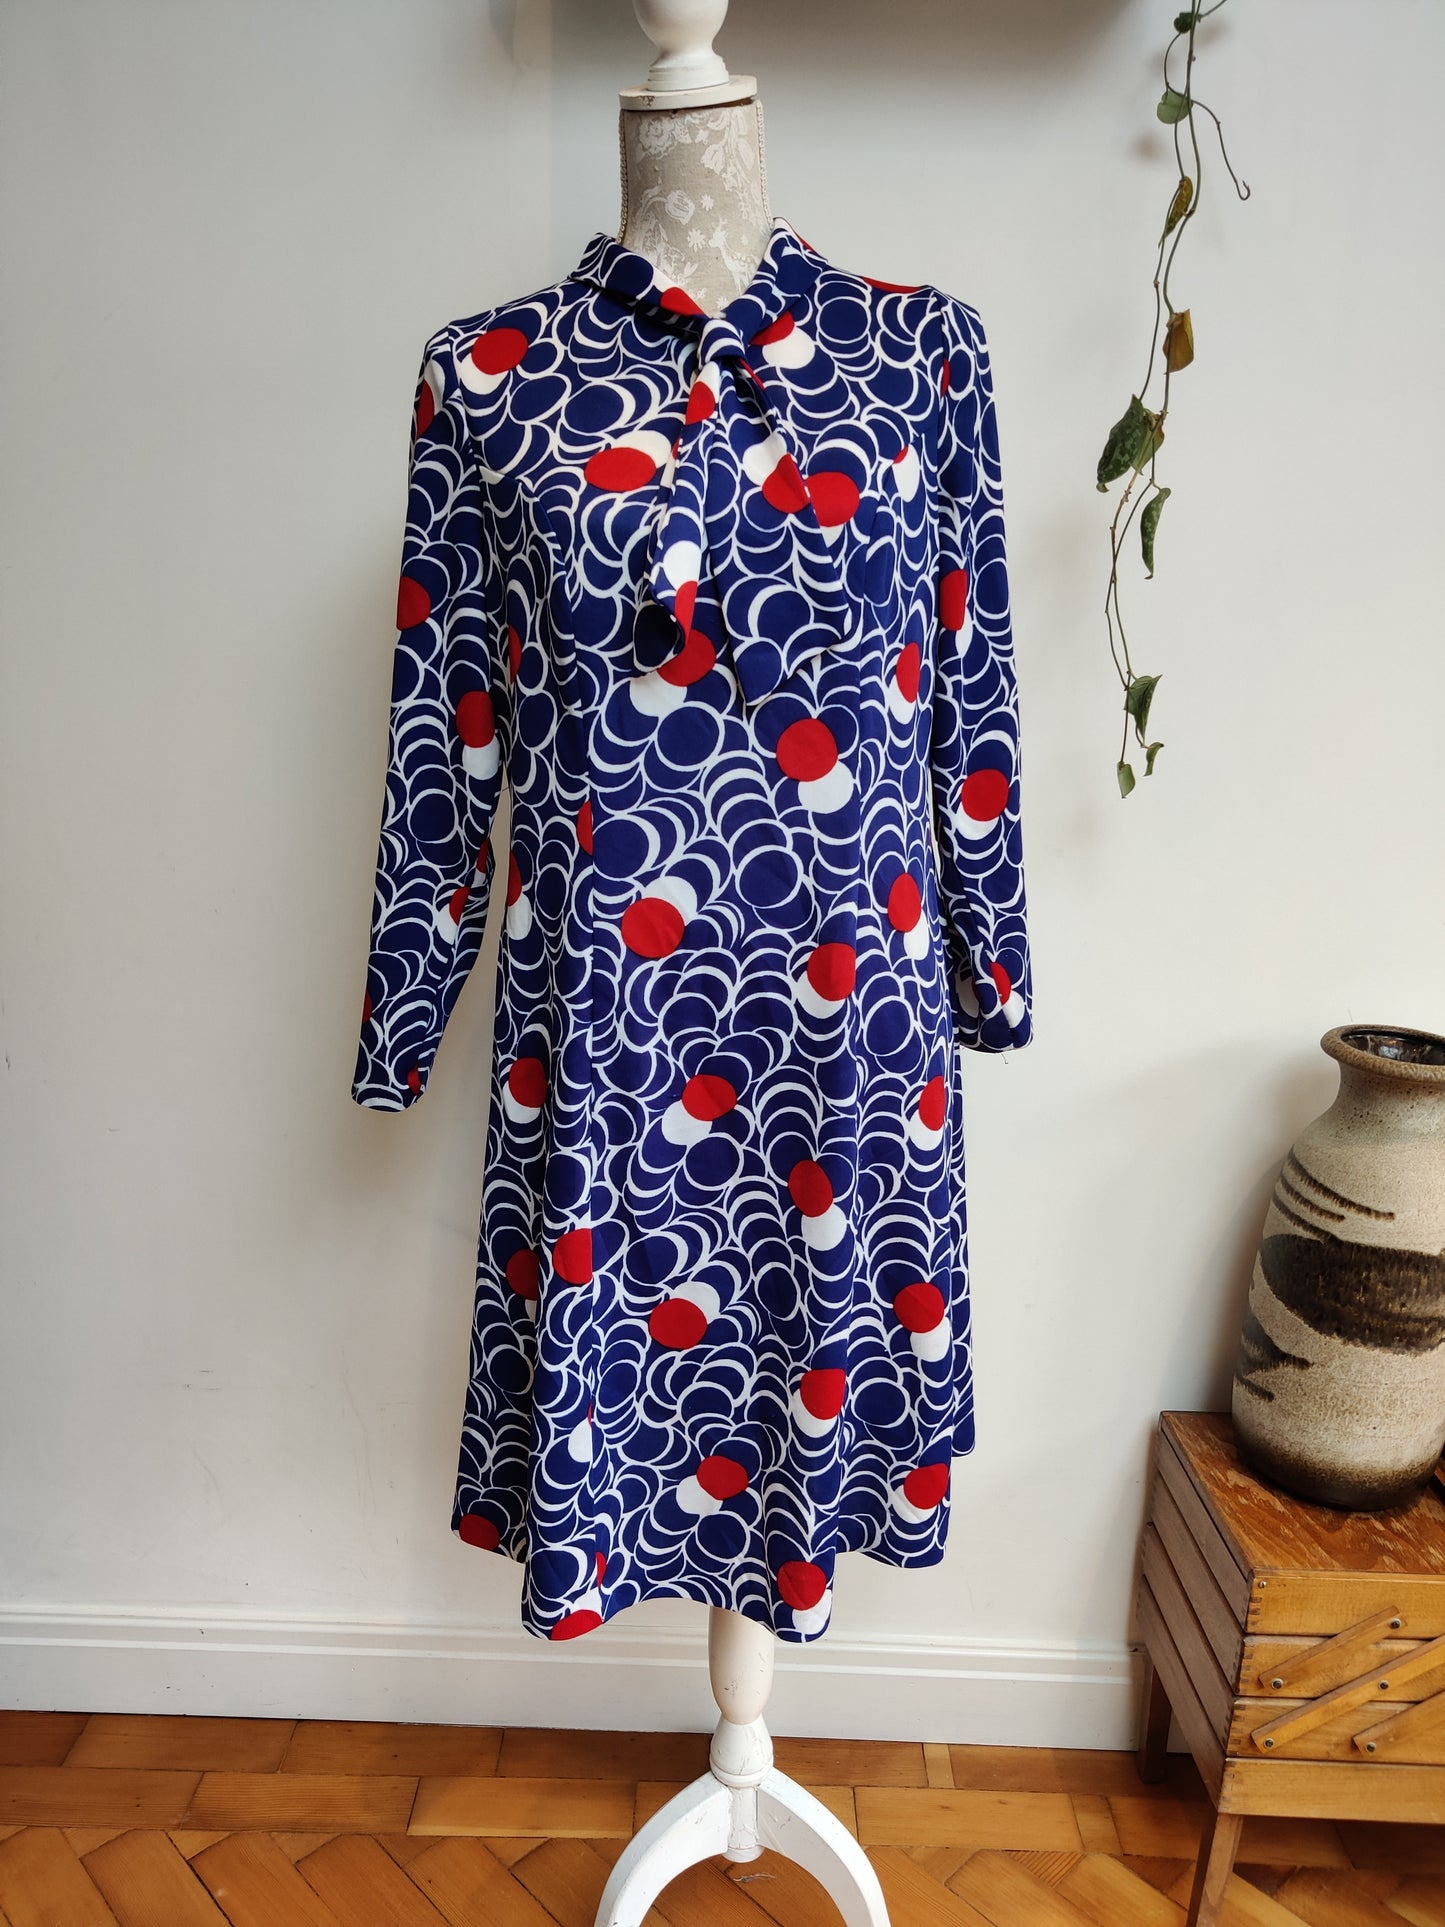 Stunning red white and blue vintage dress